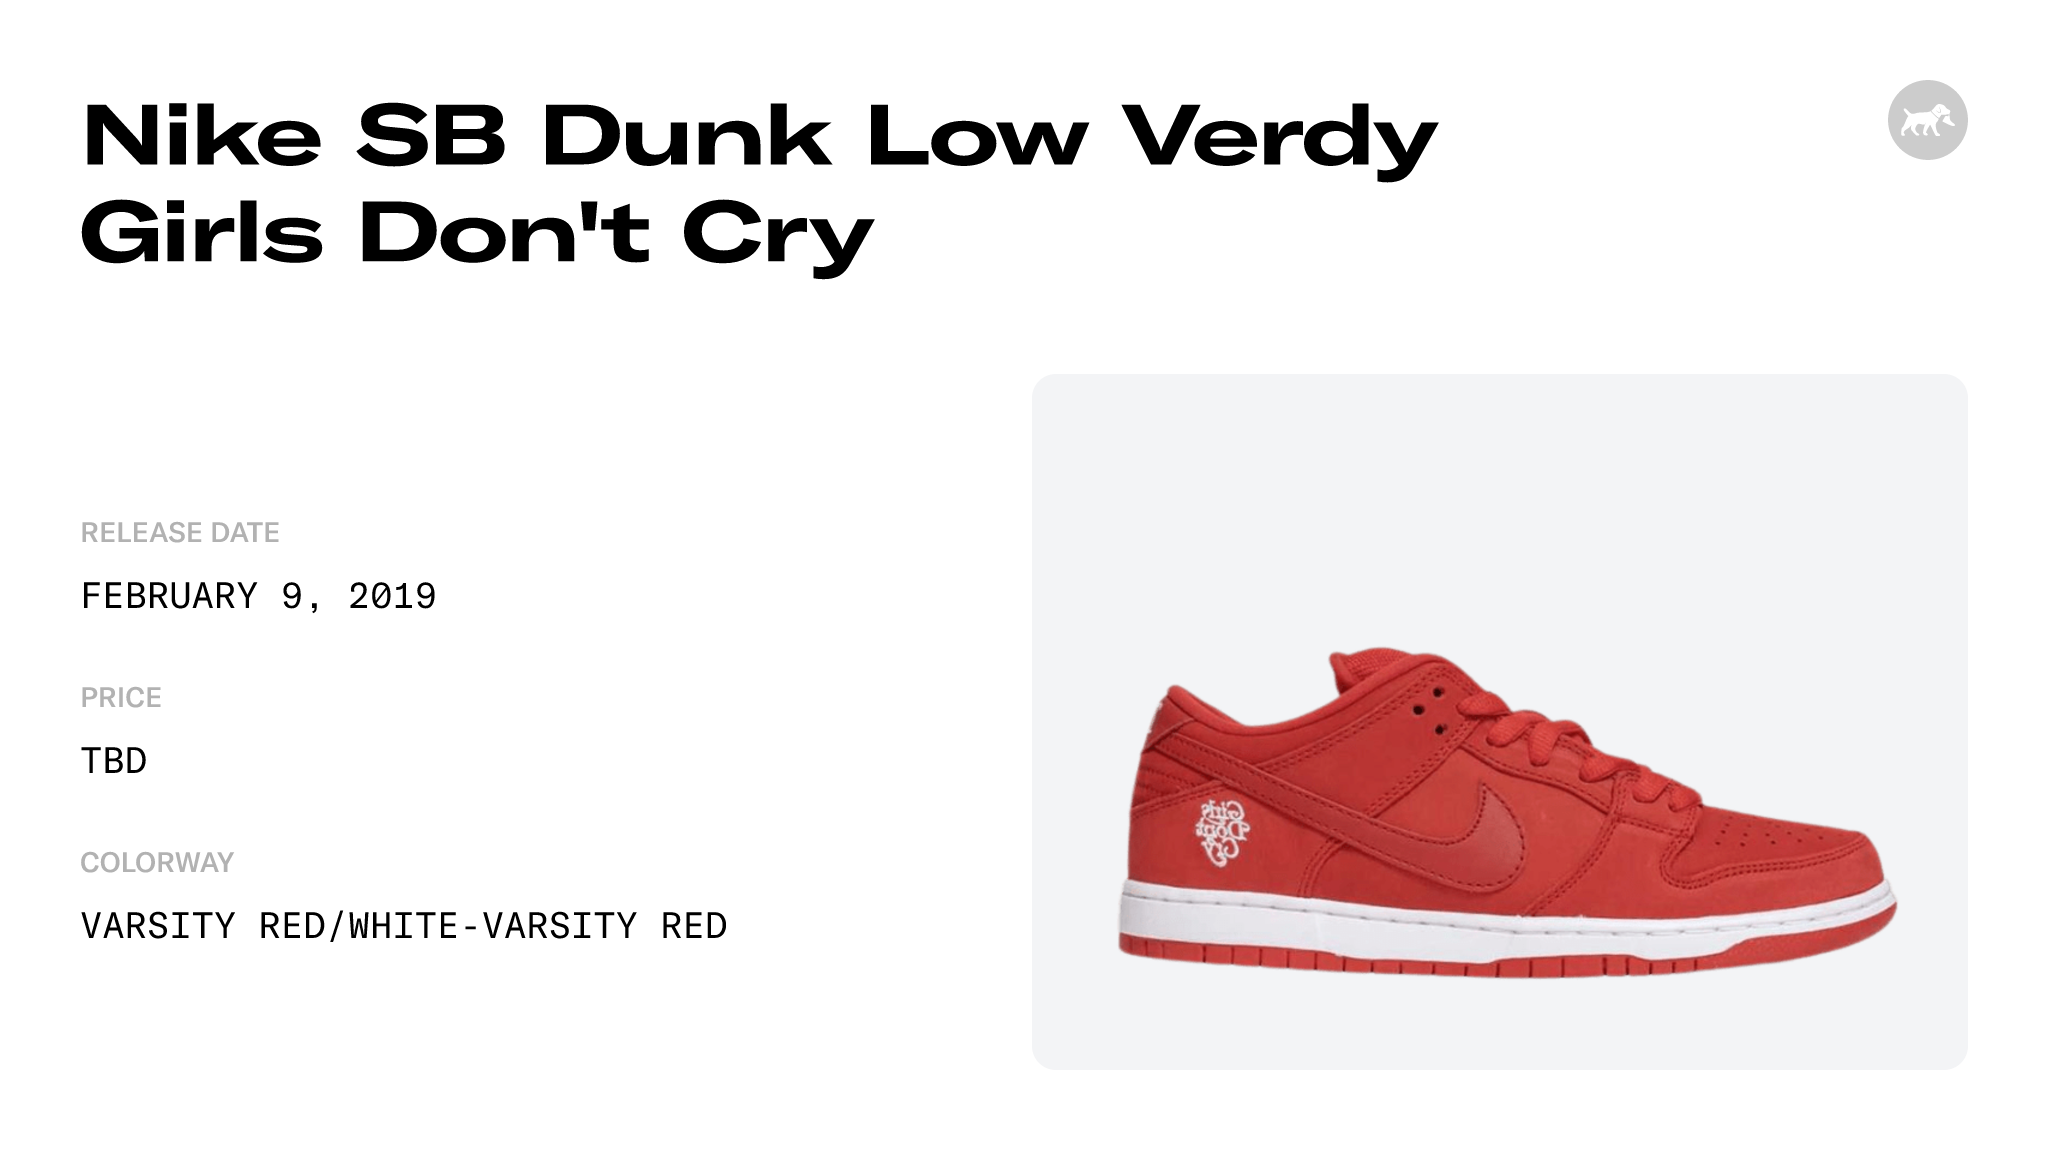 Nike SB Dunk Low Verdy Girls Don't Cry - CI2668-500 Raffles and Release Date